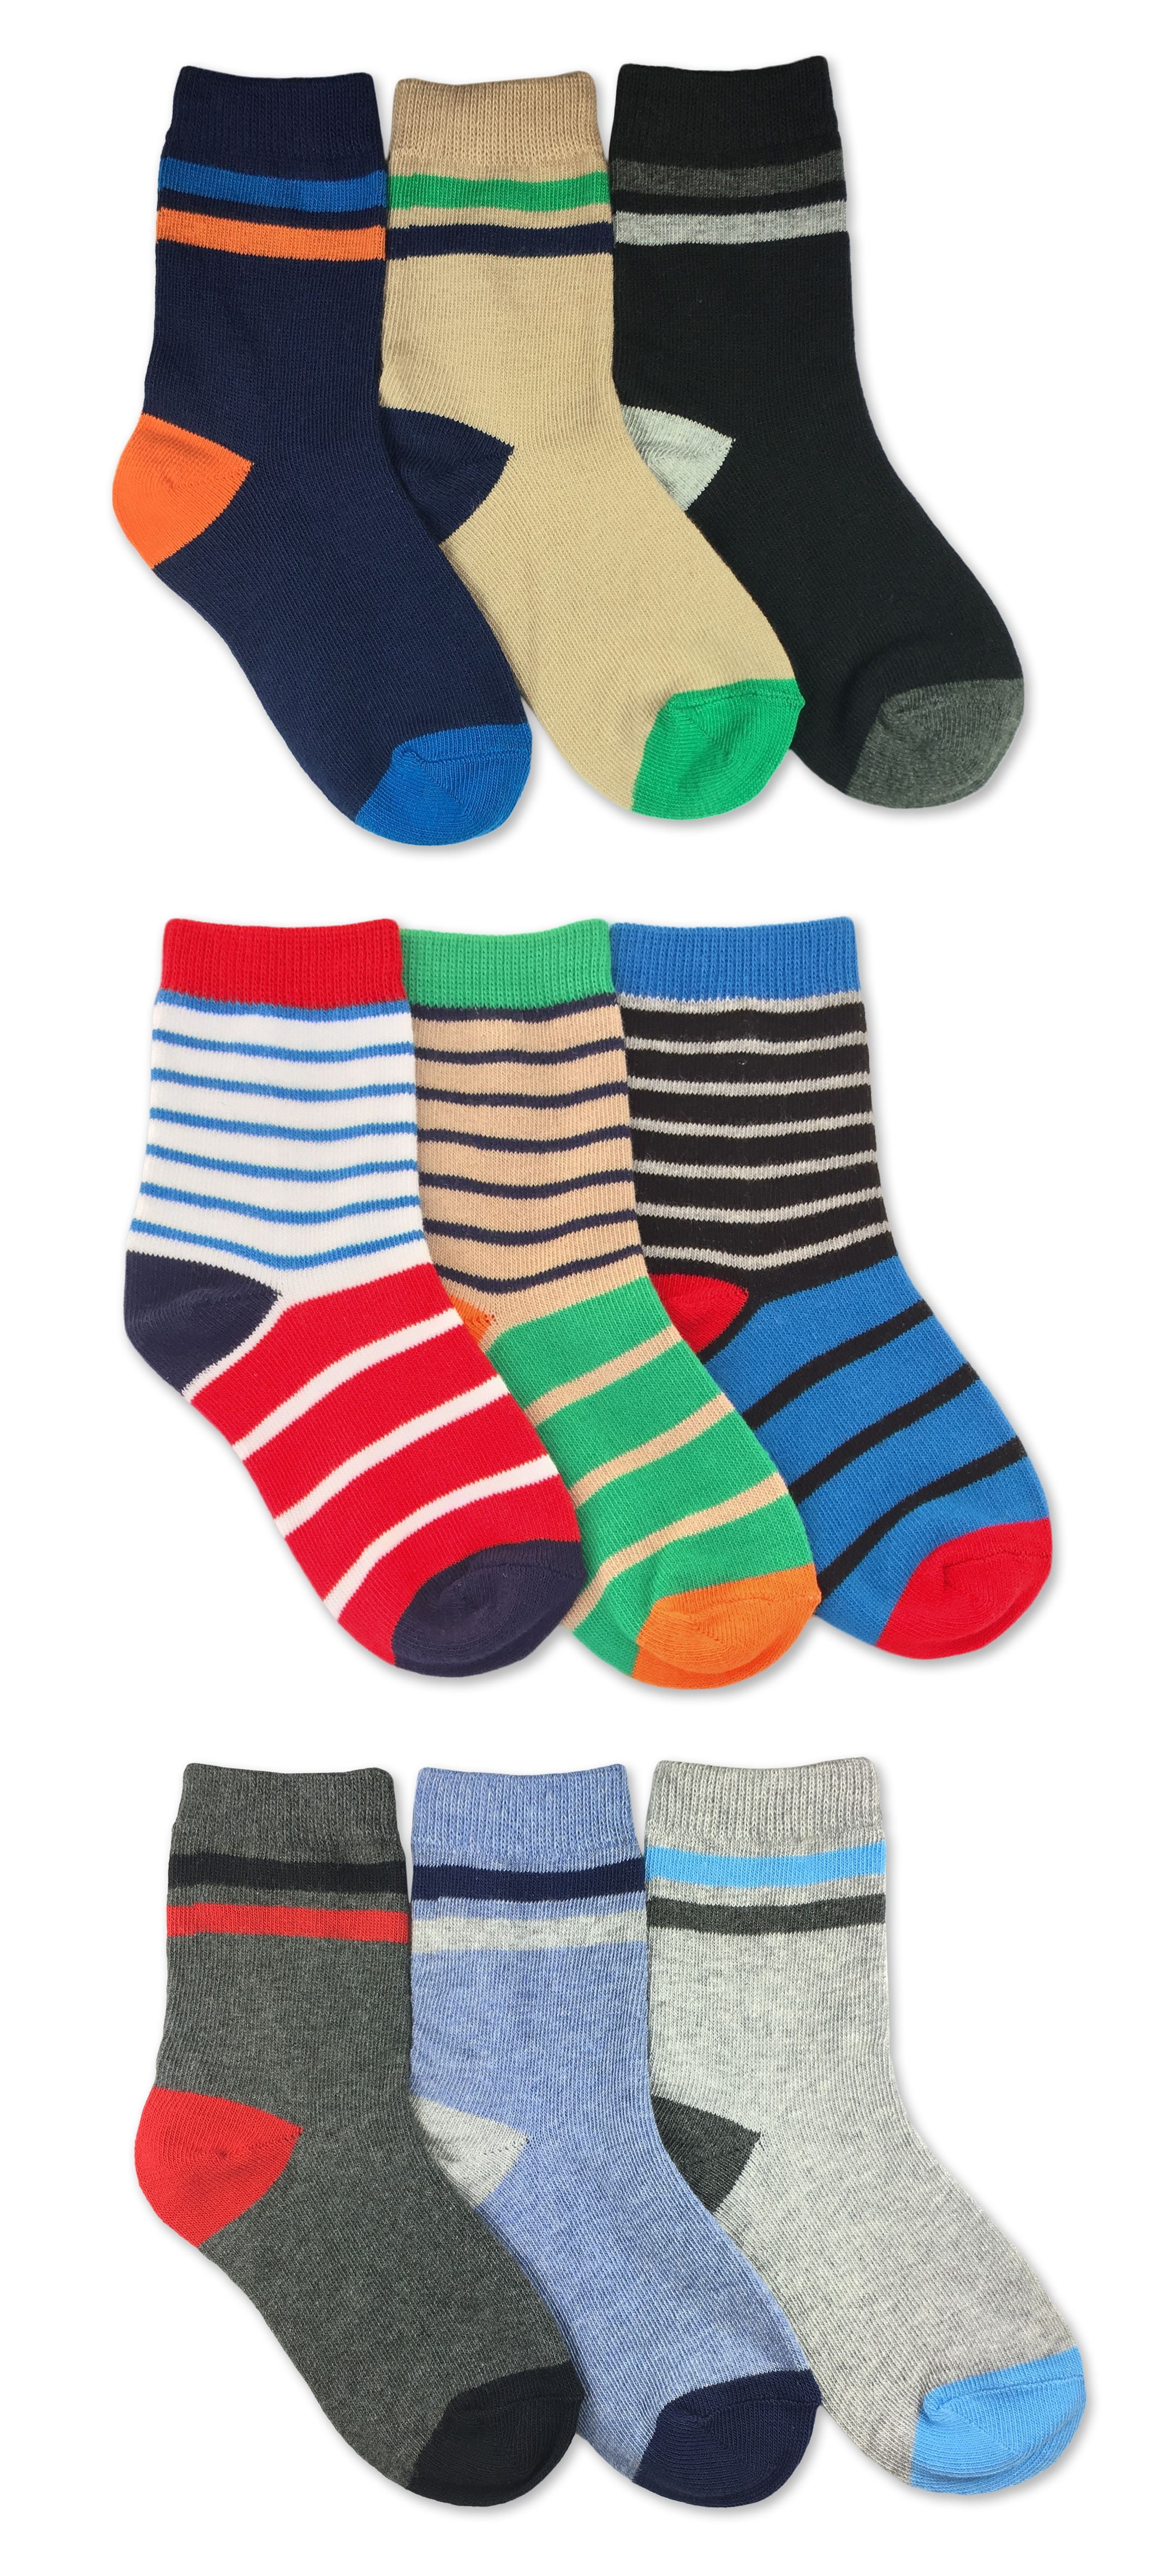 OULU Mens Boys Cotton Sock Casual Socks Strip Casual Retro Crew Stockings Set Pack of 5